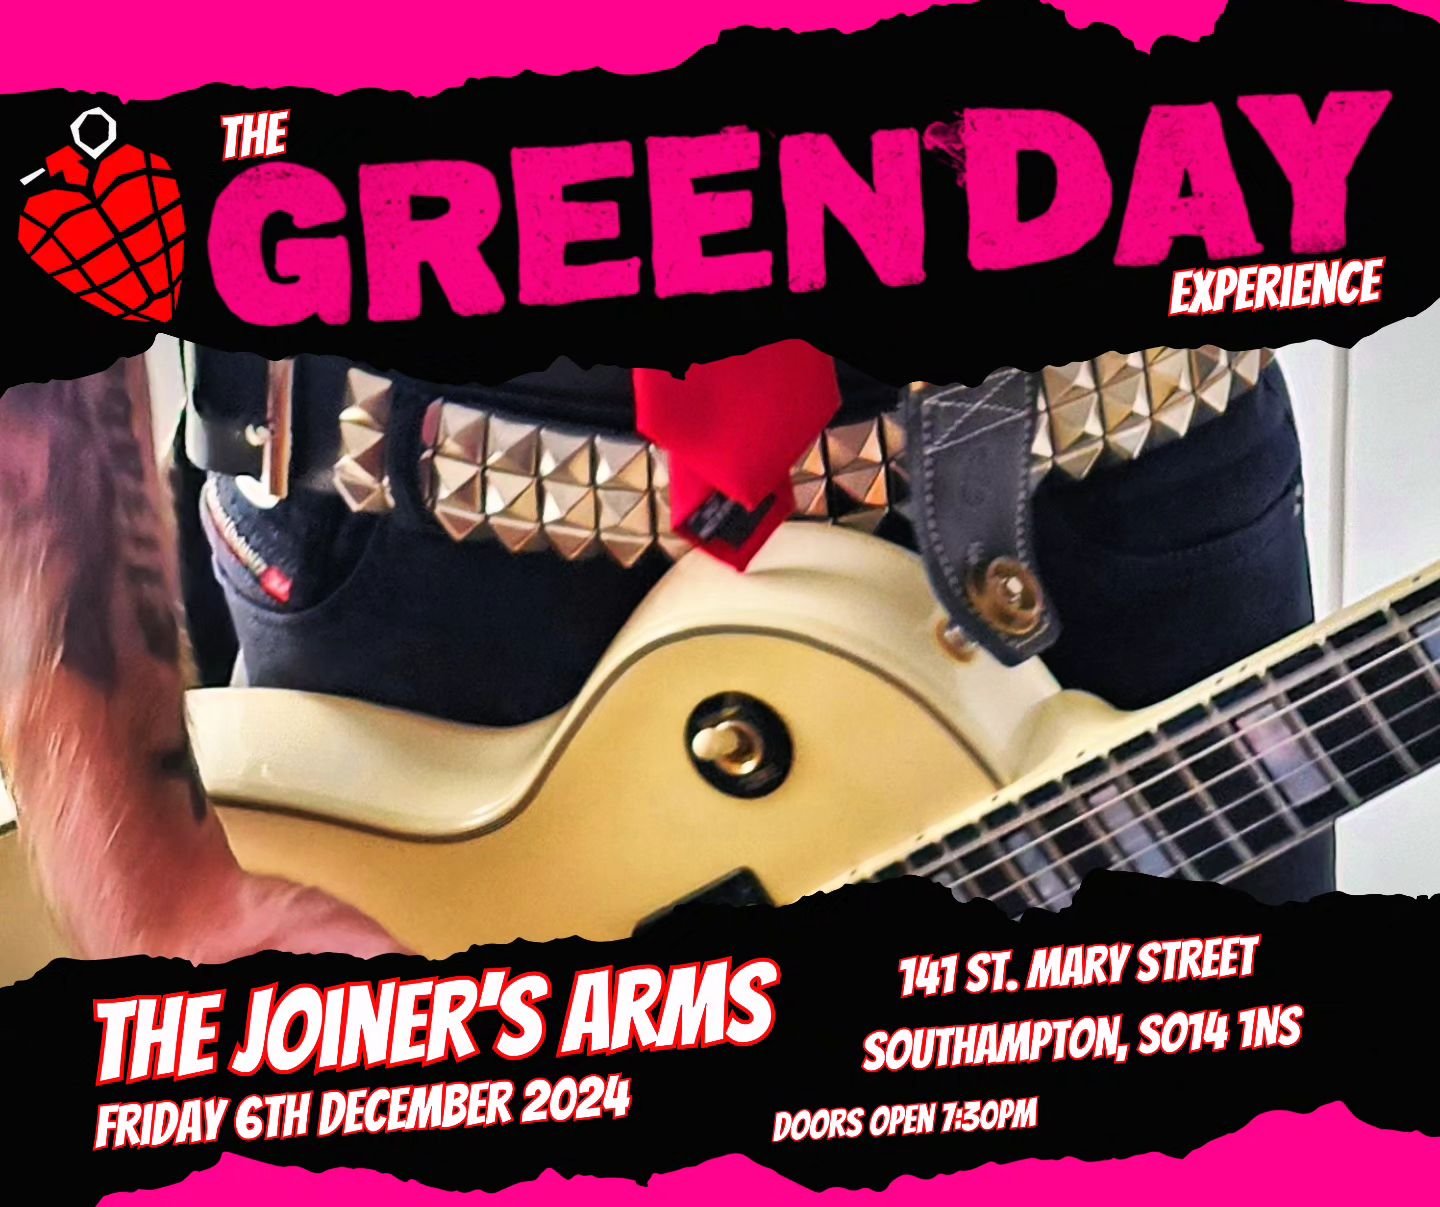 The Green Day Experience at @joinerslive, Friday 6th December 2024.
#thegreendayexperience #greenday #tribute #uk #joinerslive